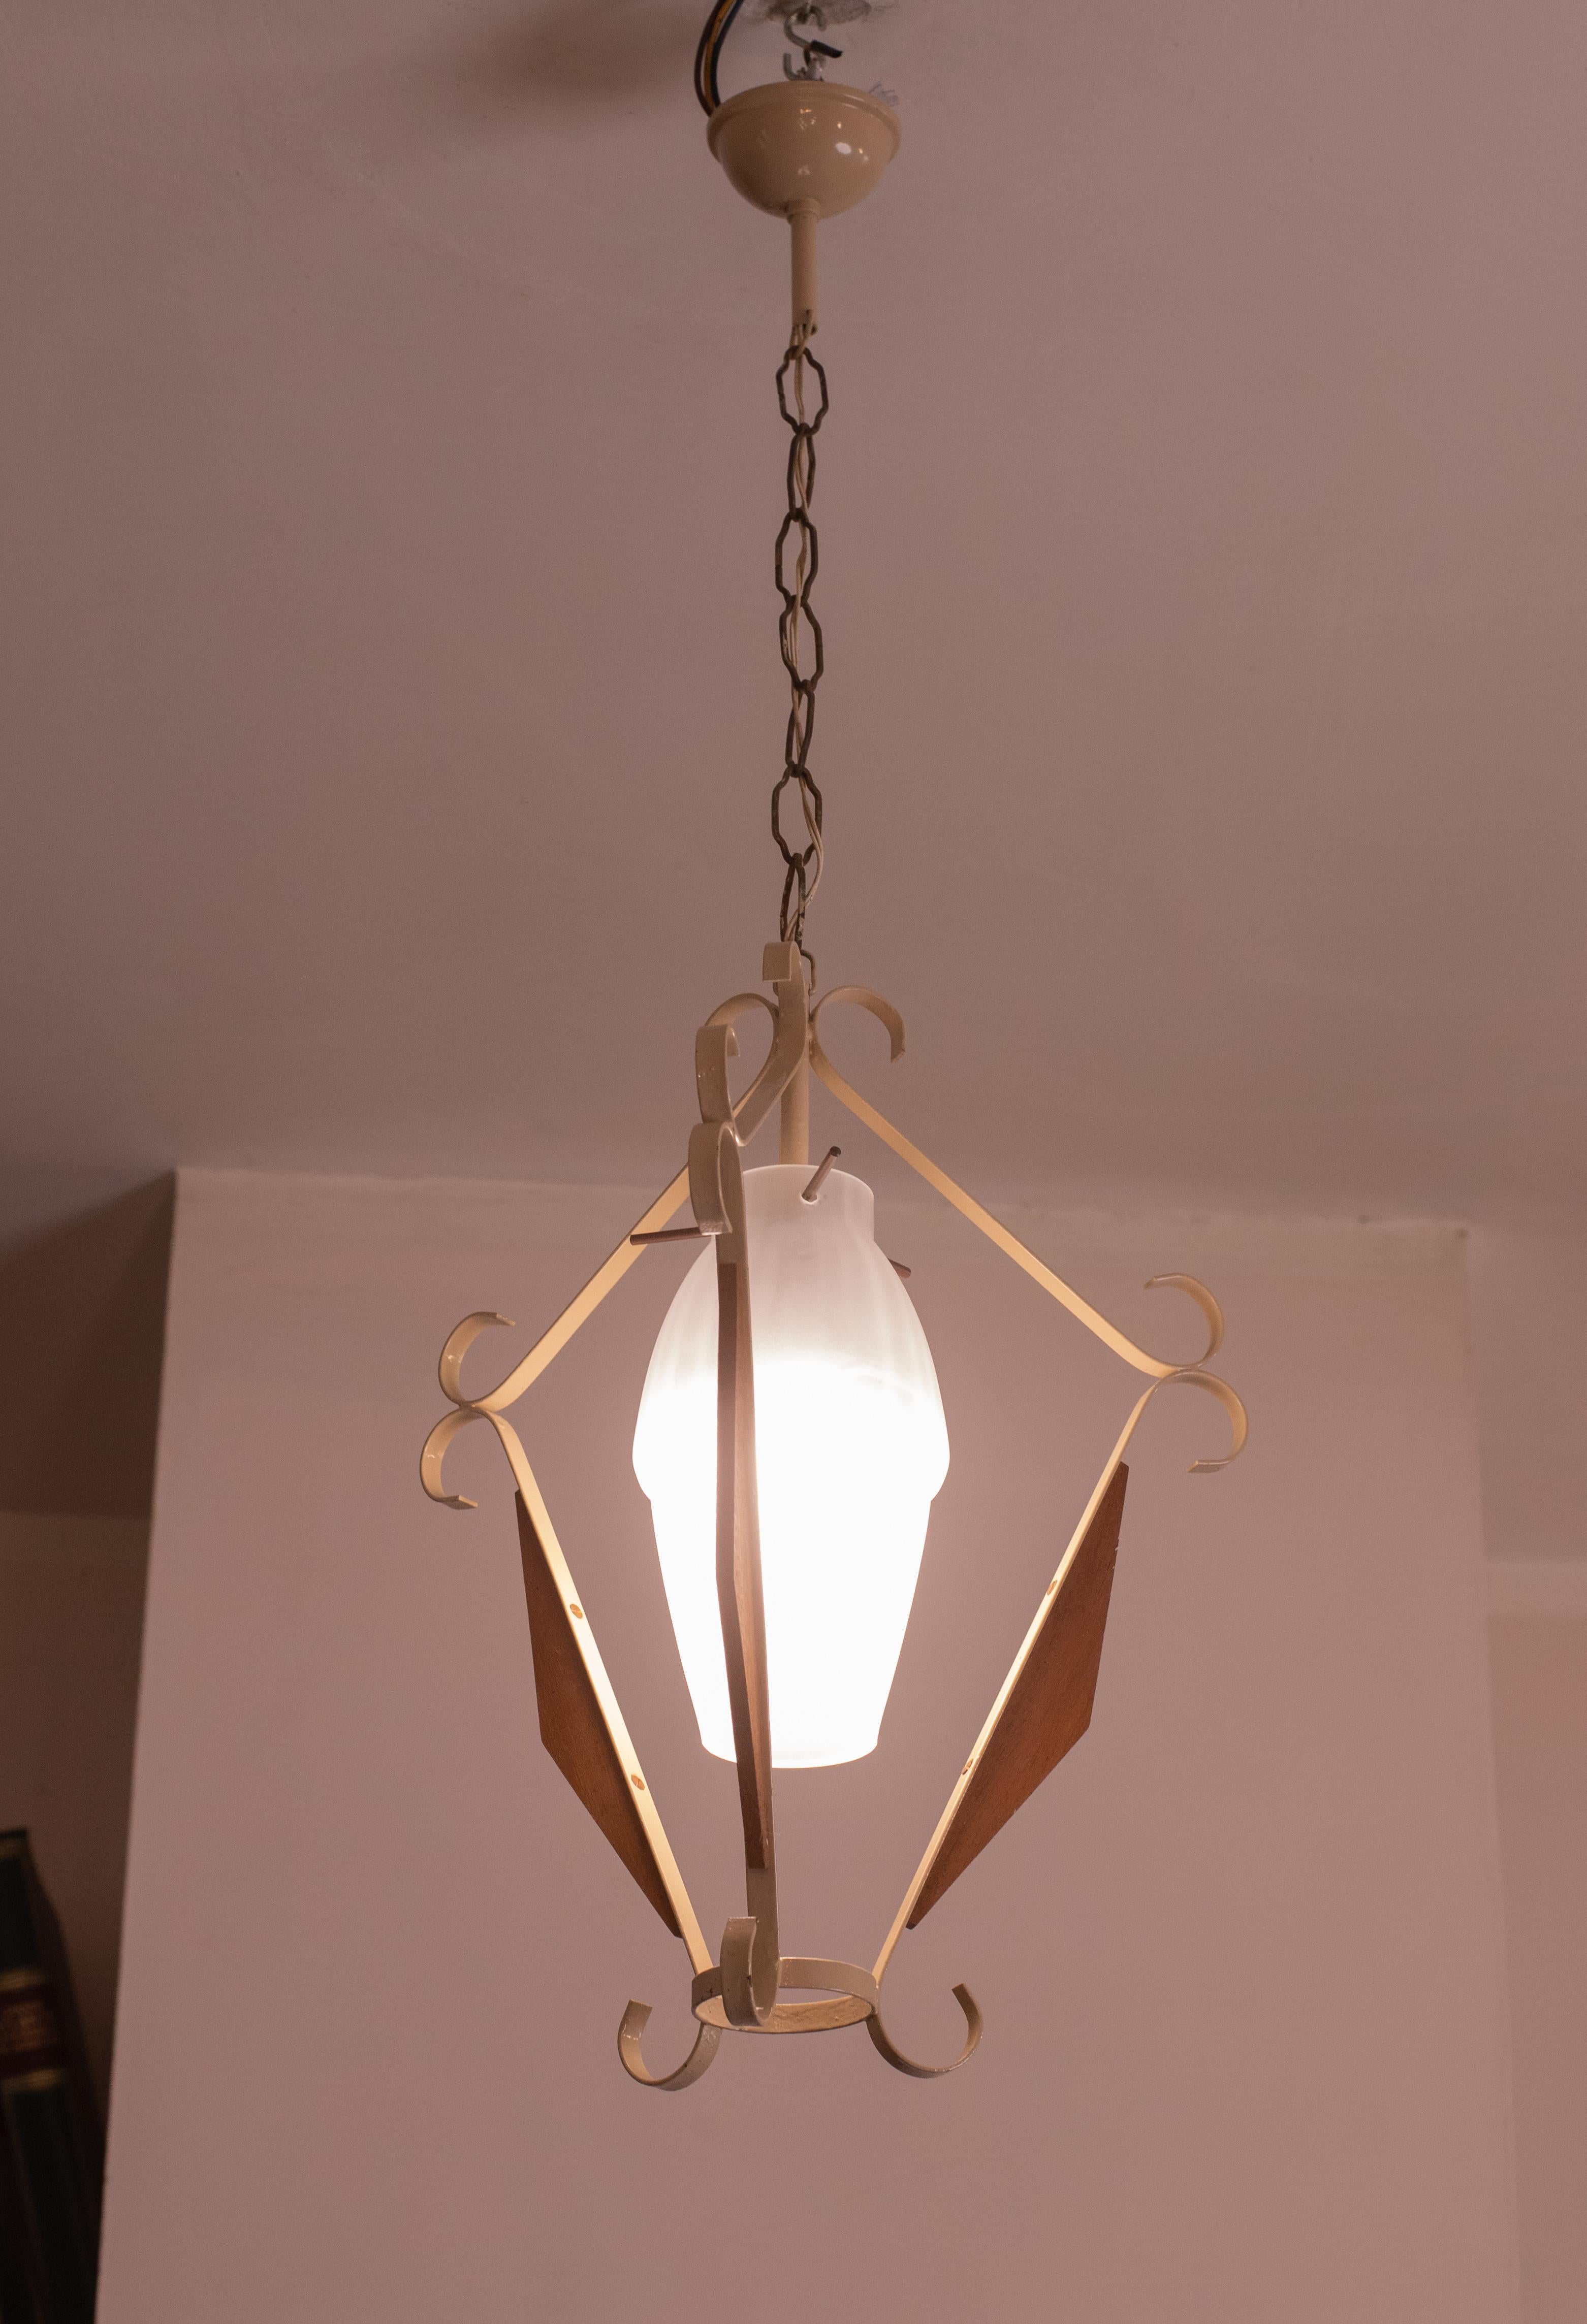 Stunning 1970s Italian Stilnovo pendant.

The light is in excellent vintage condition with all original pieces.

It mounts a European standard e14 light, perfect for decorating a small room such as an entrance hall or corridor.

Measures: